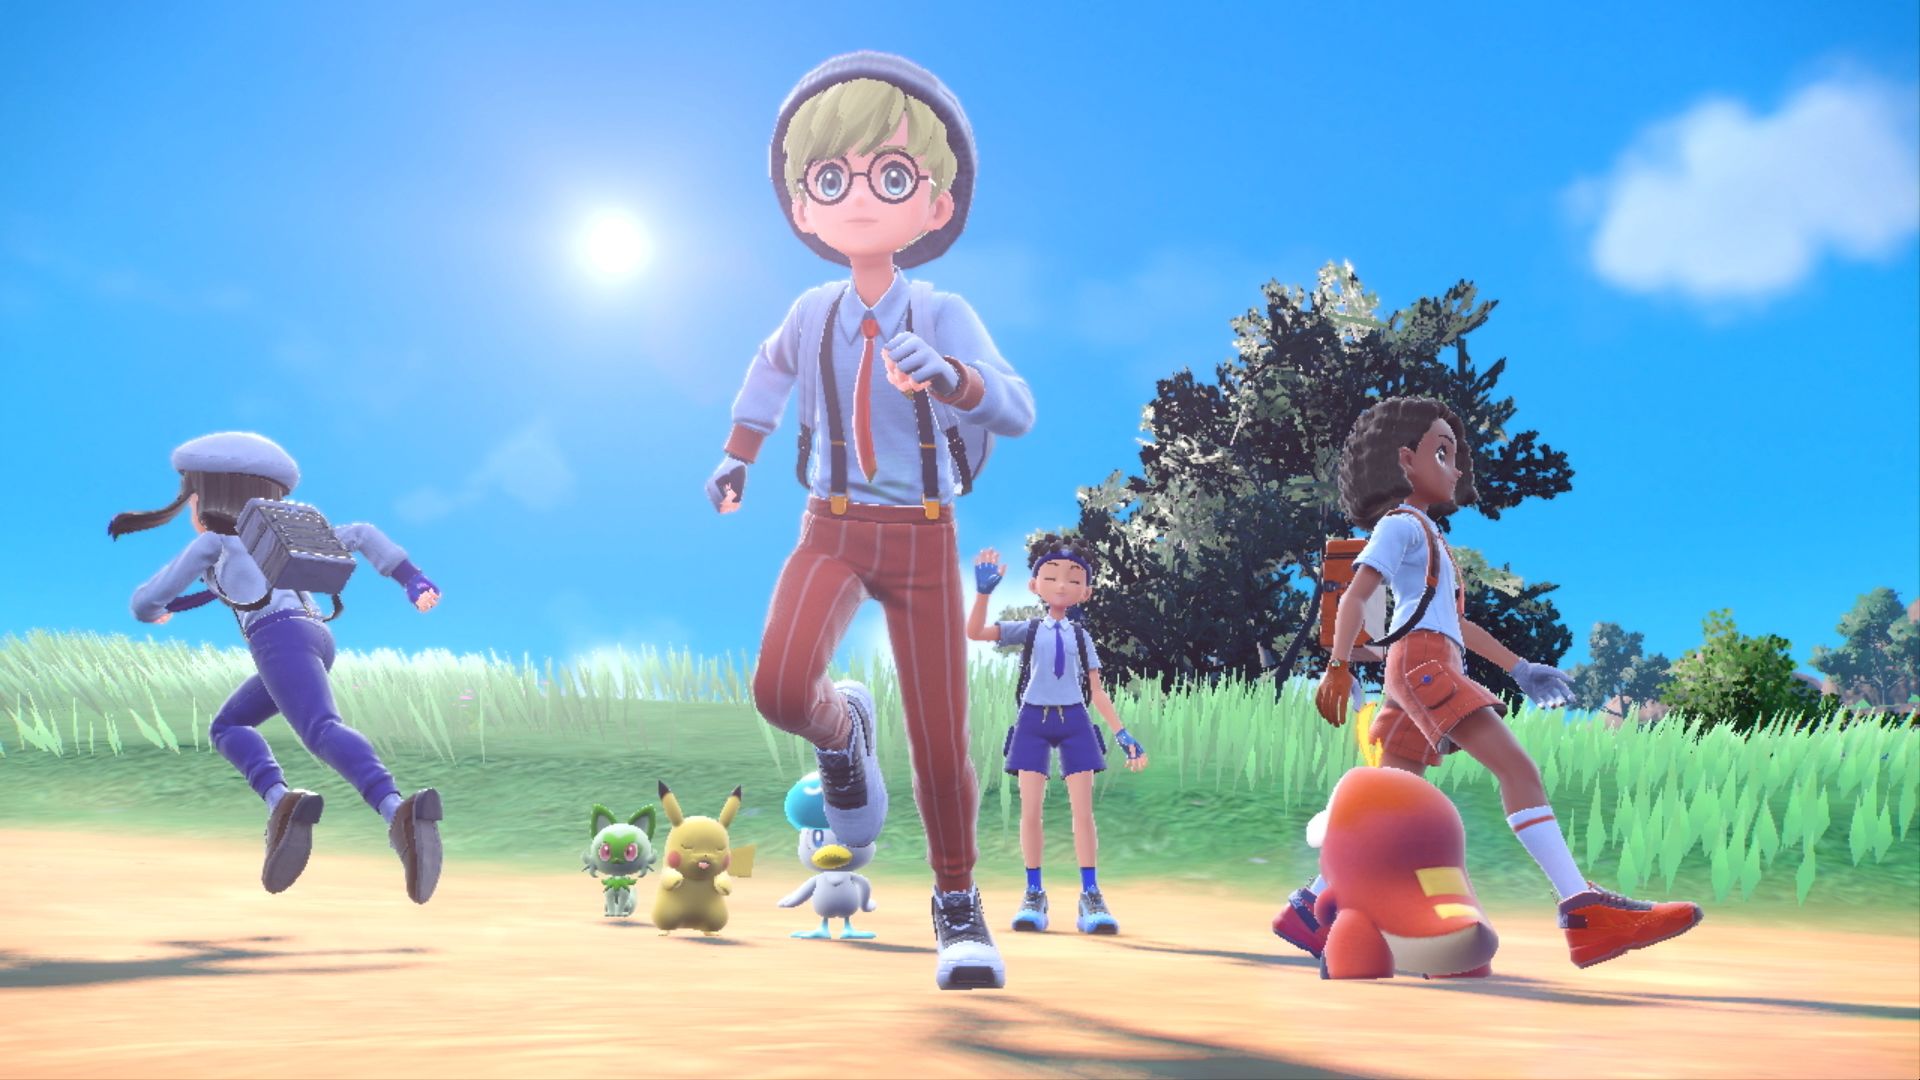 A group of four of in-game trainers (controlled by real players) exploring the Paldea region together online. The trainers are running in a field joined by their starter Pokémon.